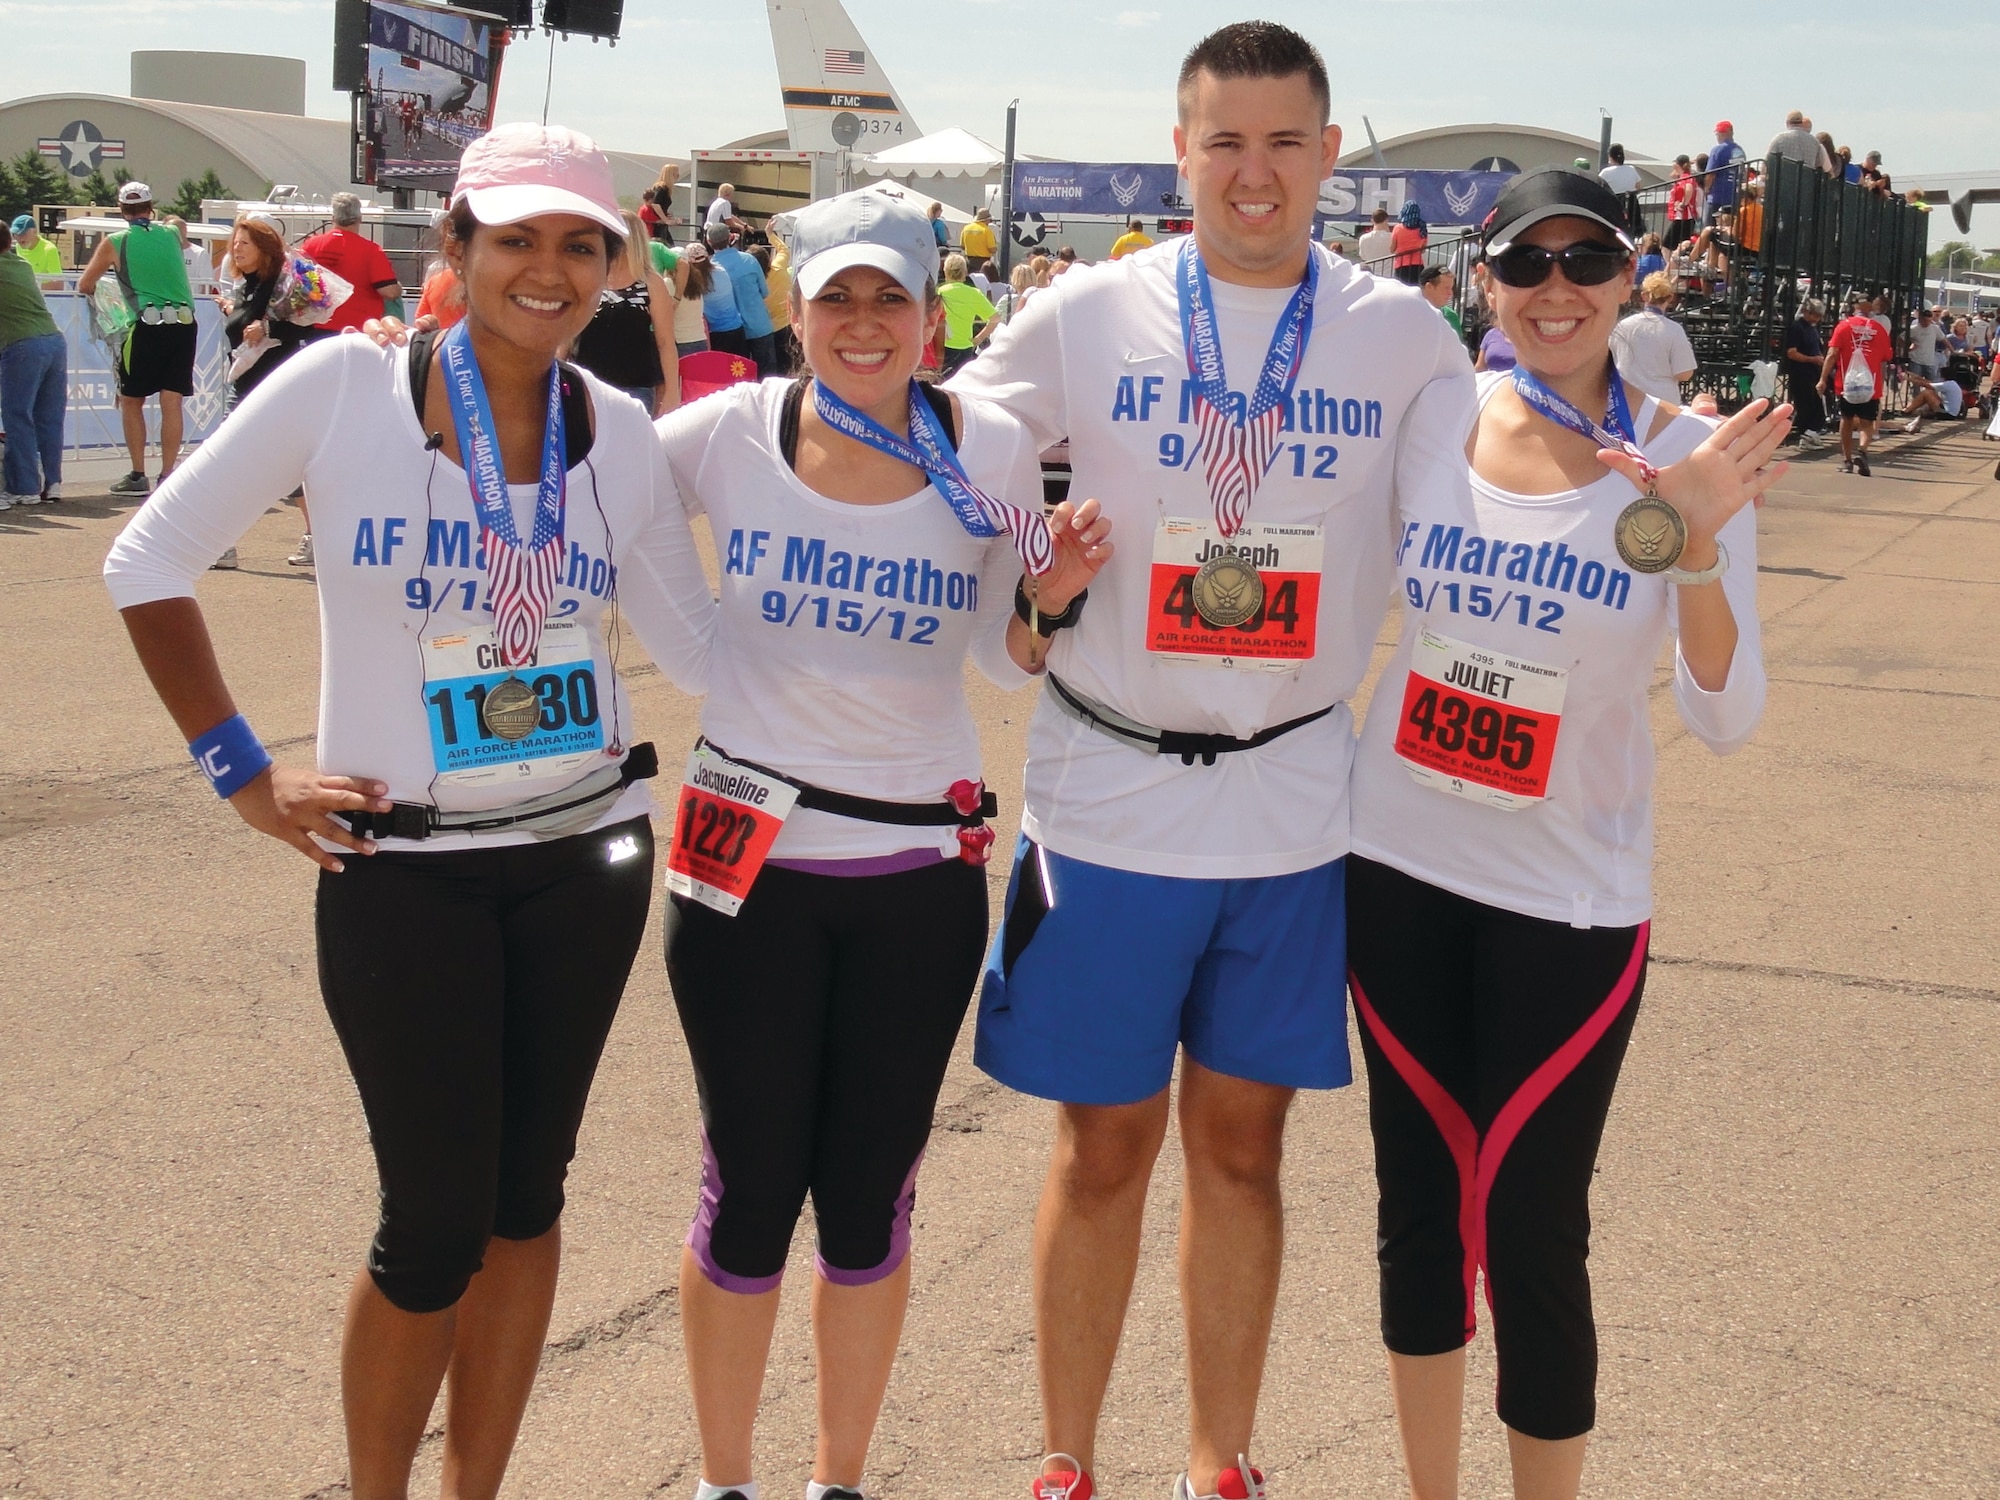 WRIGHT-PATTERSON AIR FORCE BASE, Ohio - From left to right; Cindy Valenzuela, Jackie Duarte, Joseph Valenzuela and Juliet Valenzuela, show off their medals after completing the 2012 Air Force Marathon. Cindy, Joseph’s wife, received her medal for completing the half marathon. (Courtesy photo)